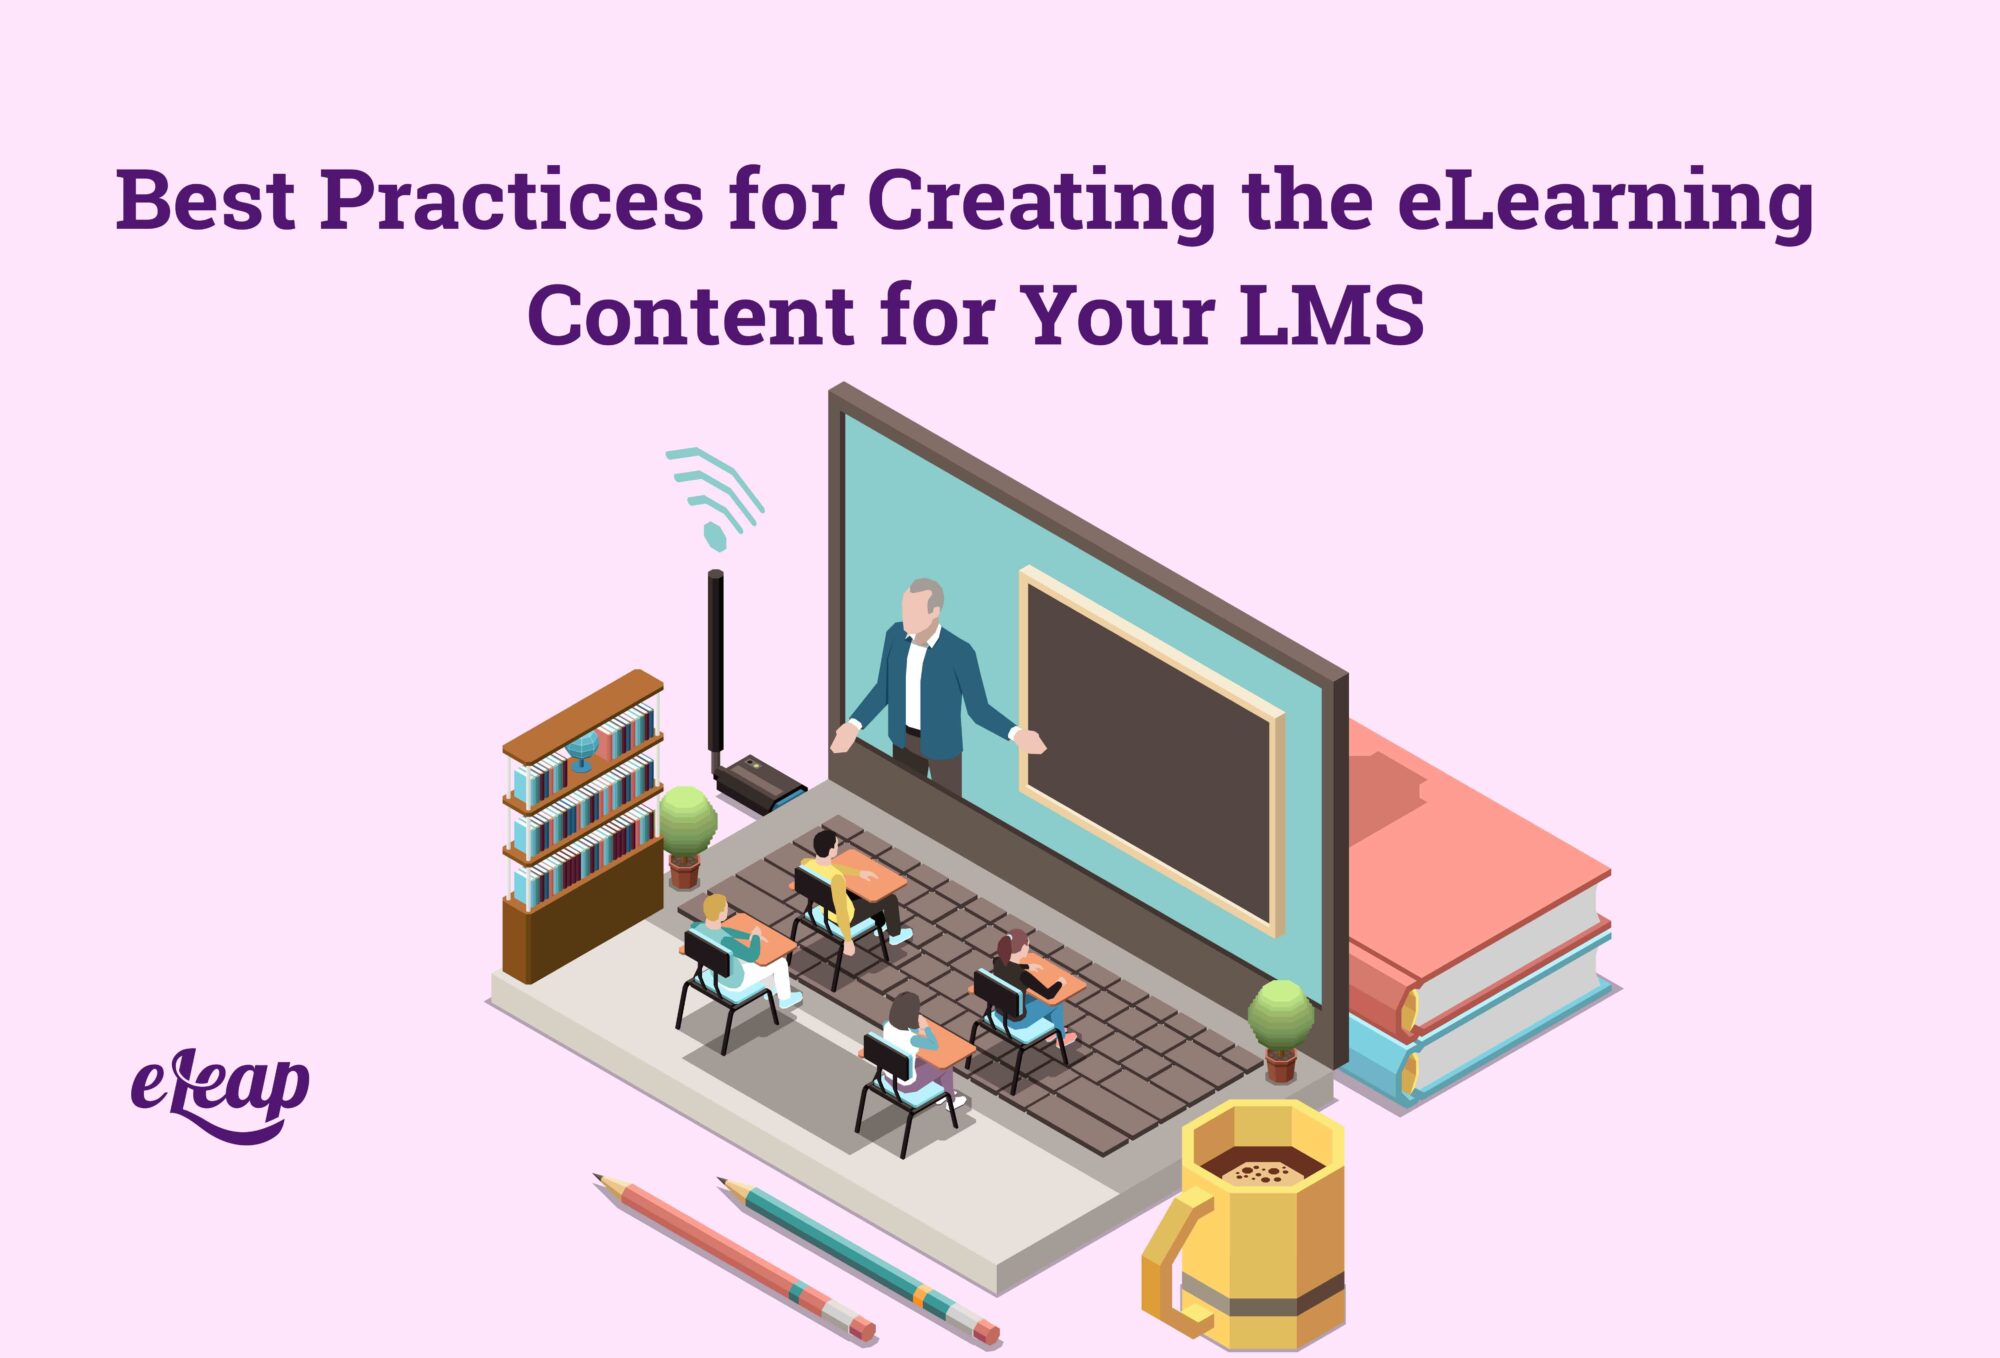 Best Practices for Creating the eLearning Content for Your LMS